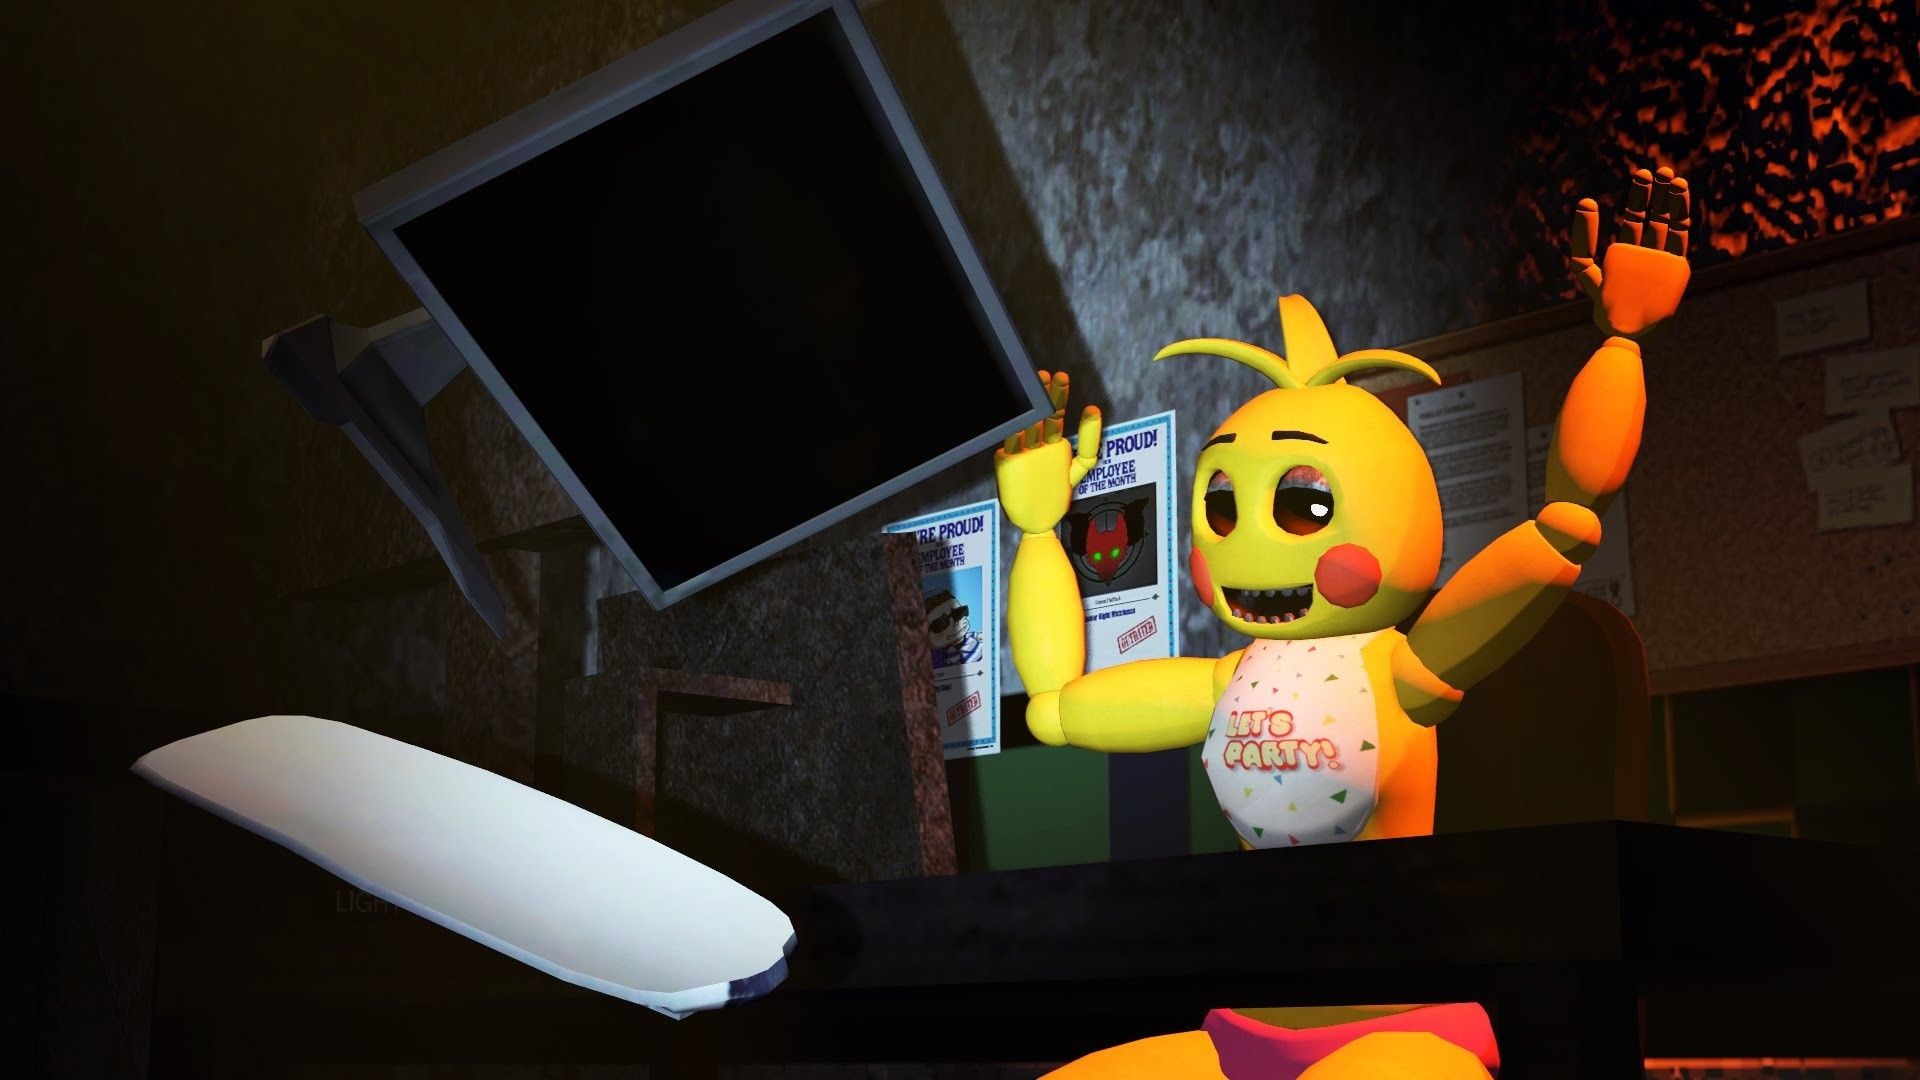 1920x1080 Toy-Chica-Fnaf-Wallpaper-PIC-WPXH539324 - xshyfc.com